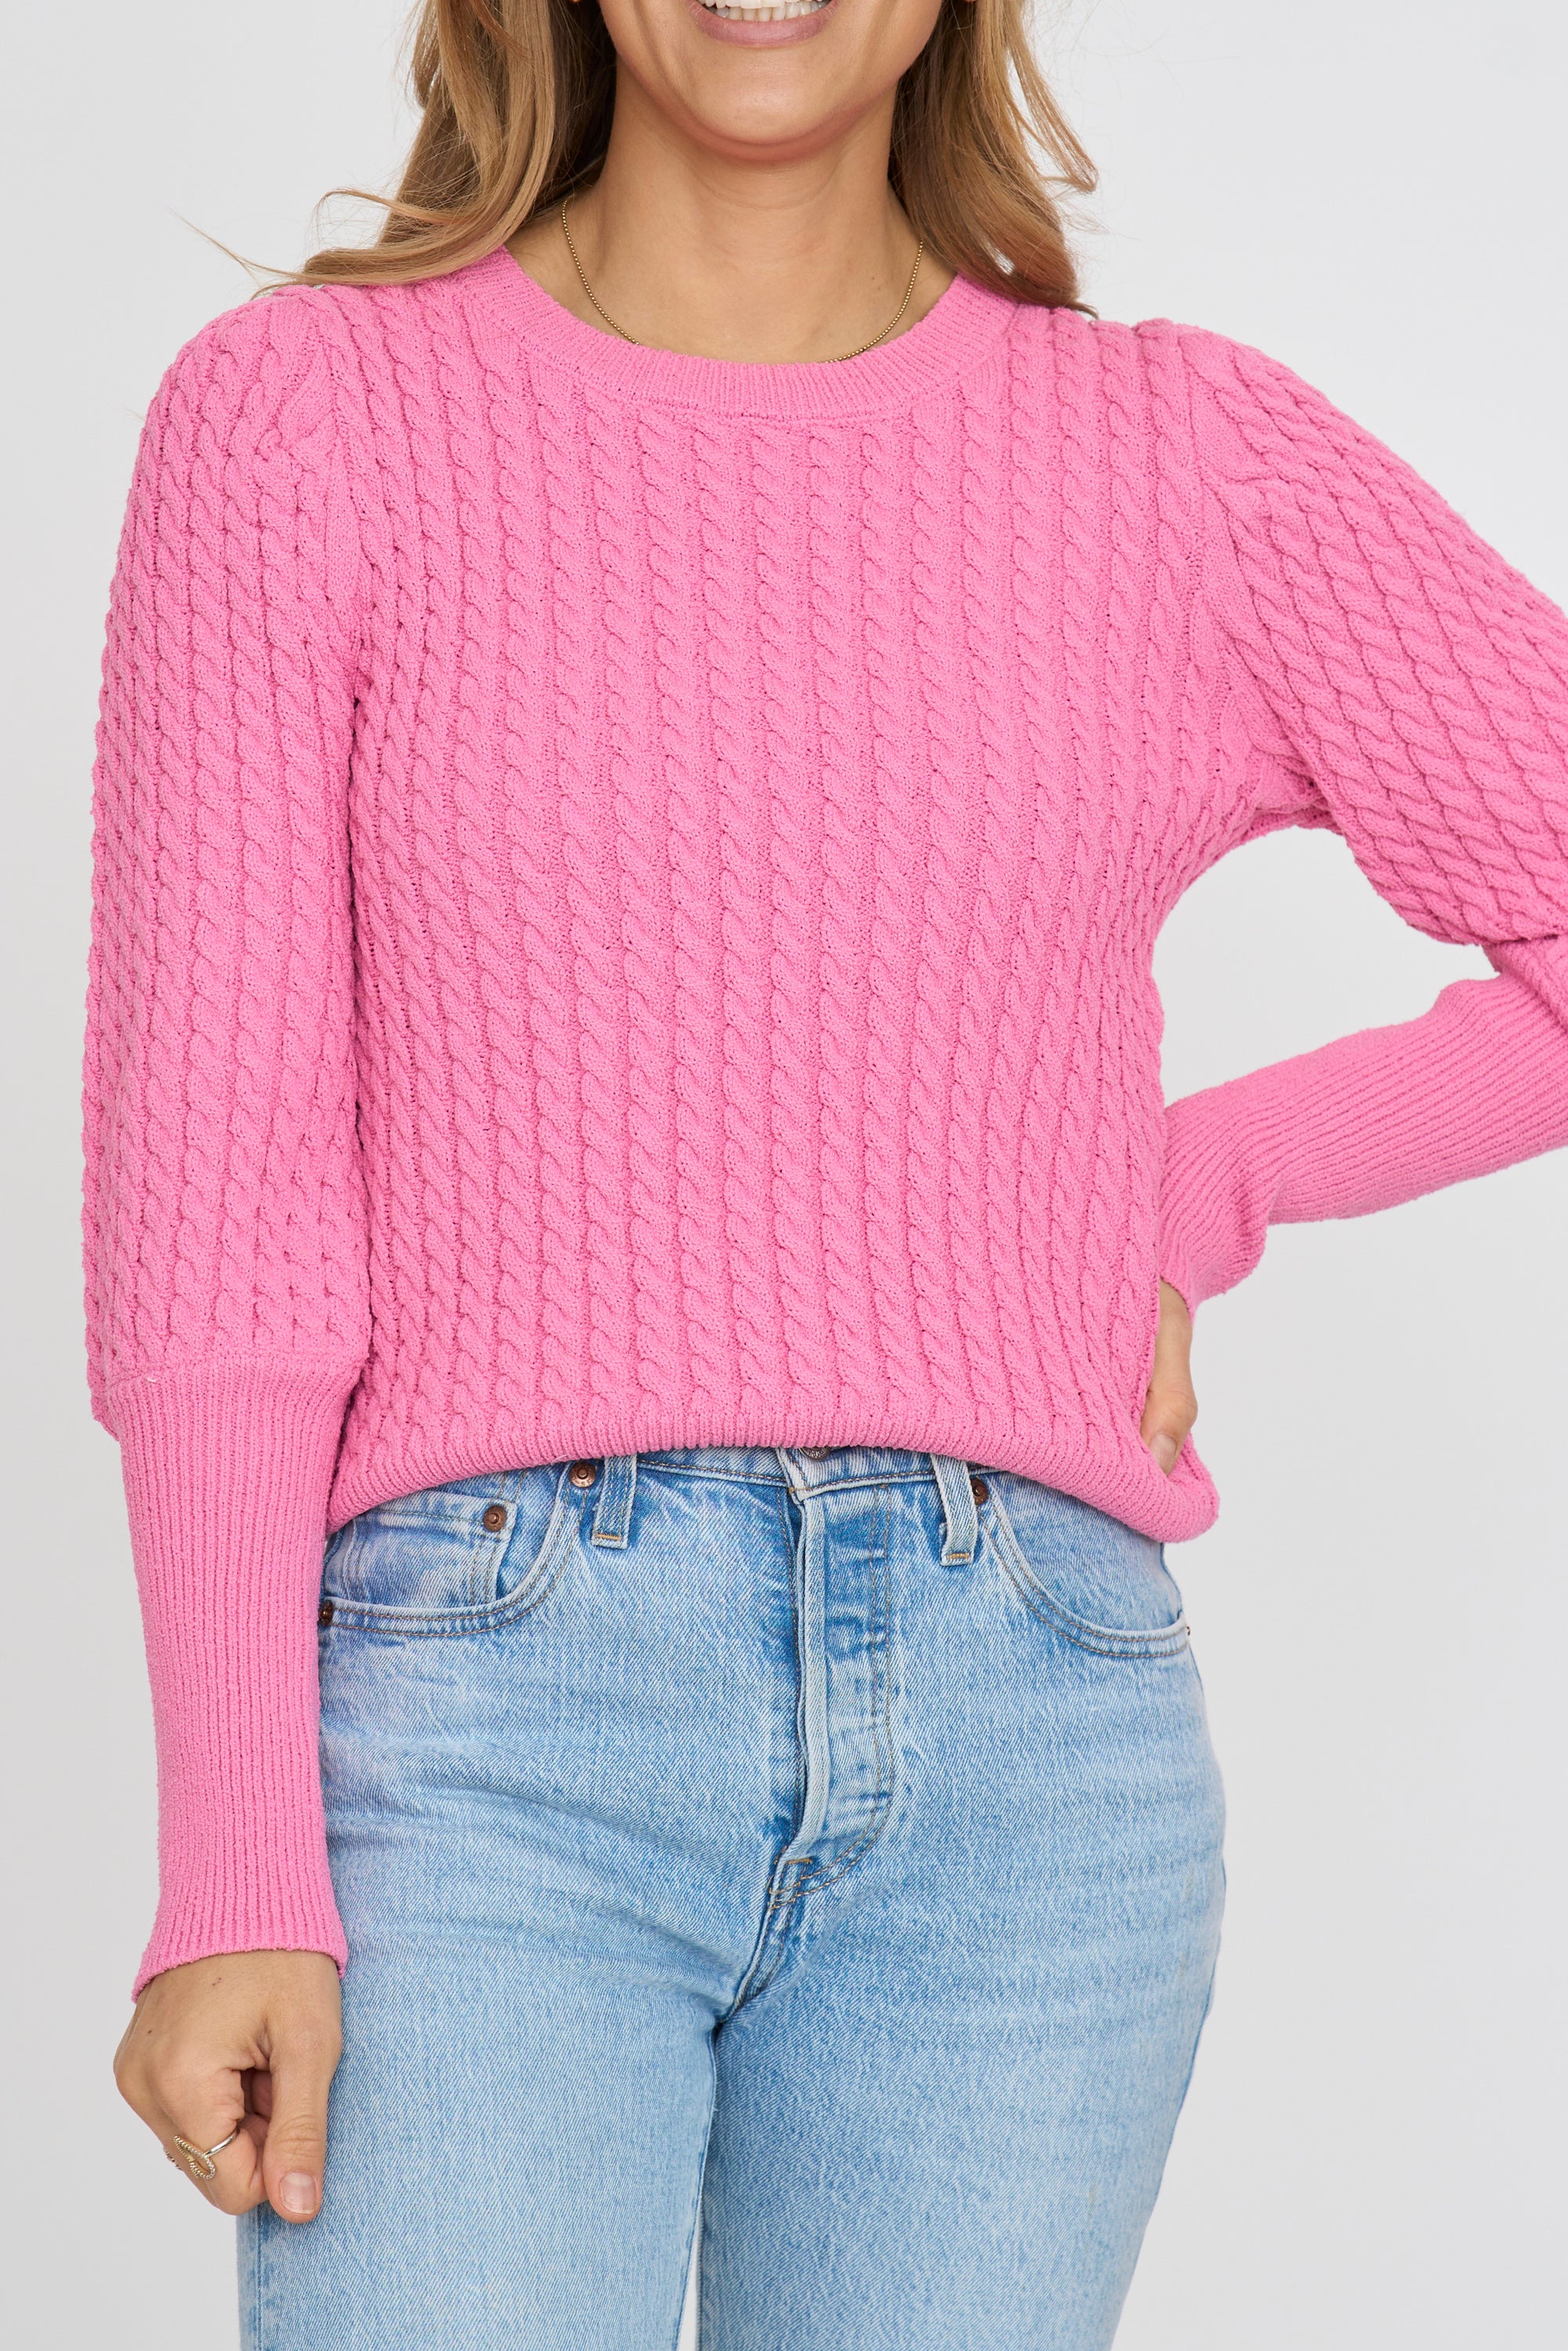 Suzanne Puff Sleeve Knit Top